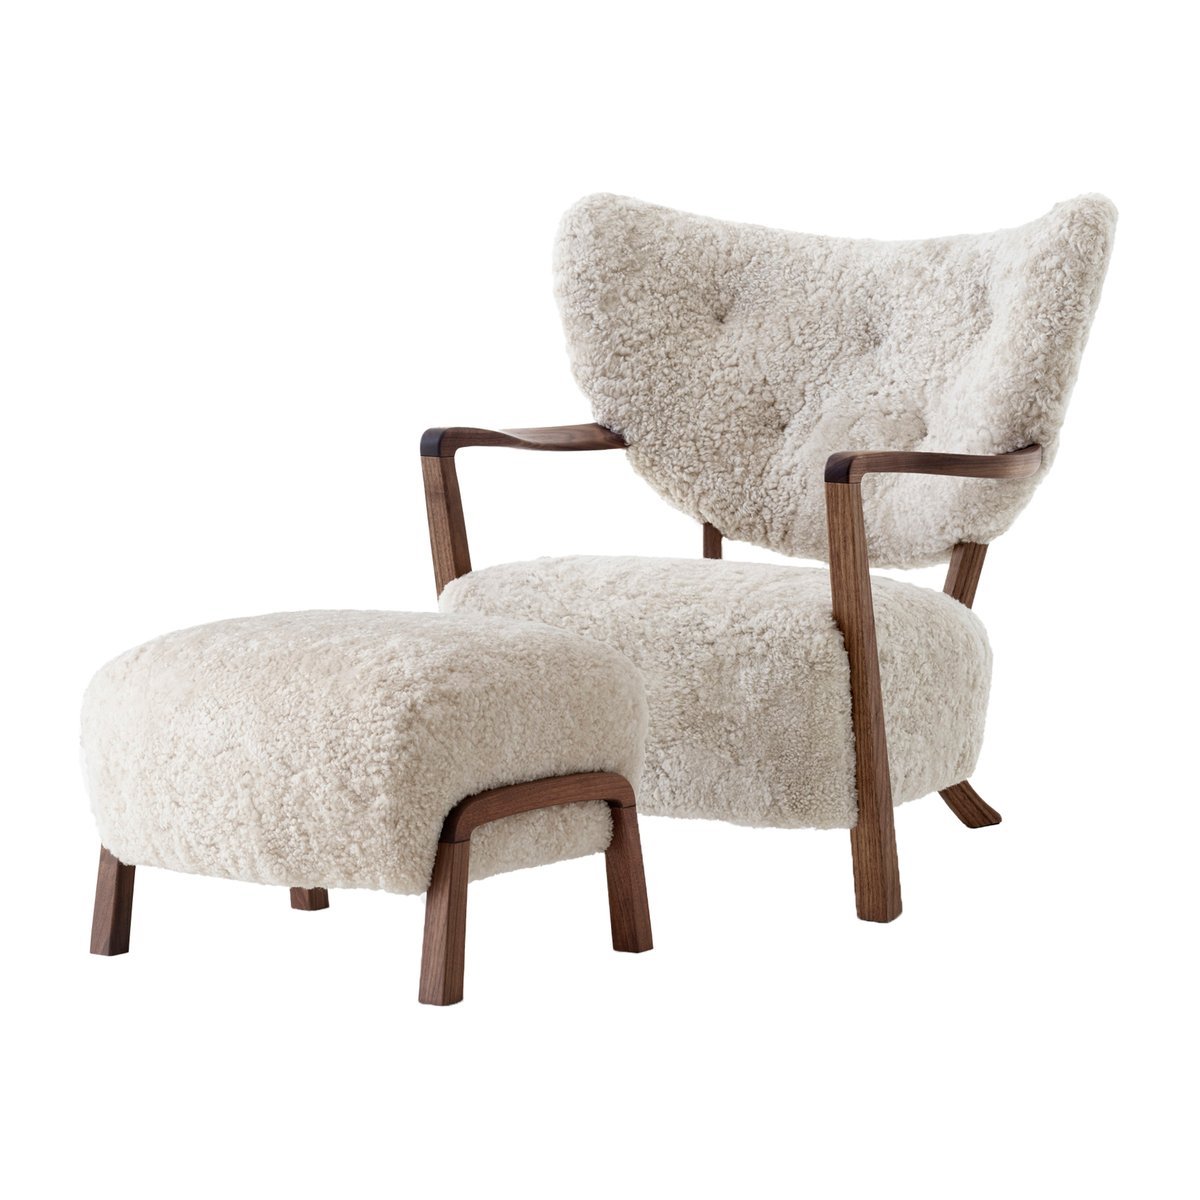 &Tradition Wulff Lounge Chair ATD2 fauteuil incl. poef ATD3 Geolied walnoot-Moonlight